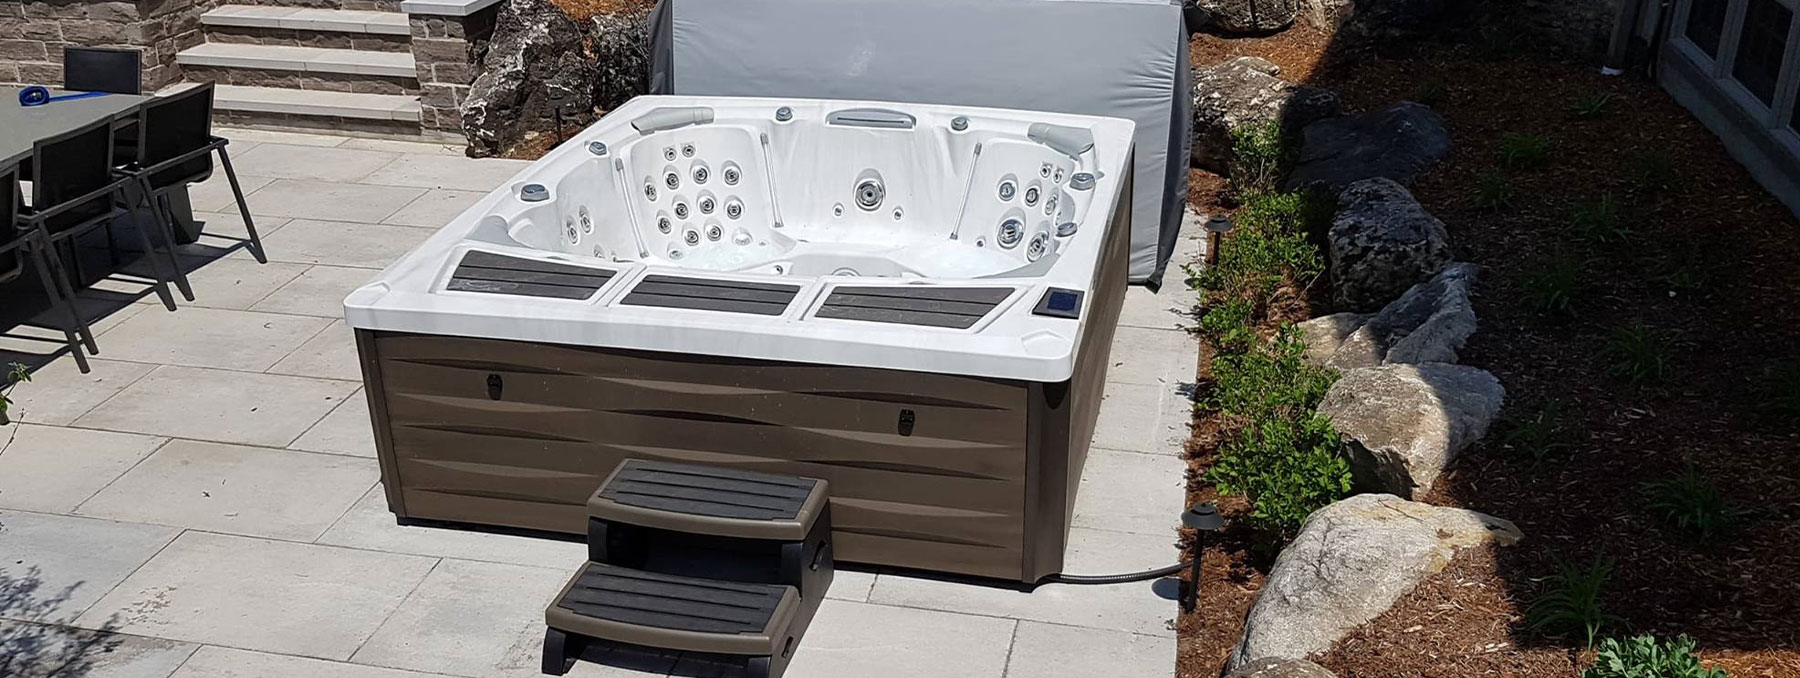 Do I need to have a certain platform to install my hot tub on?